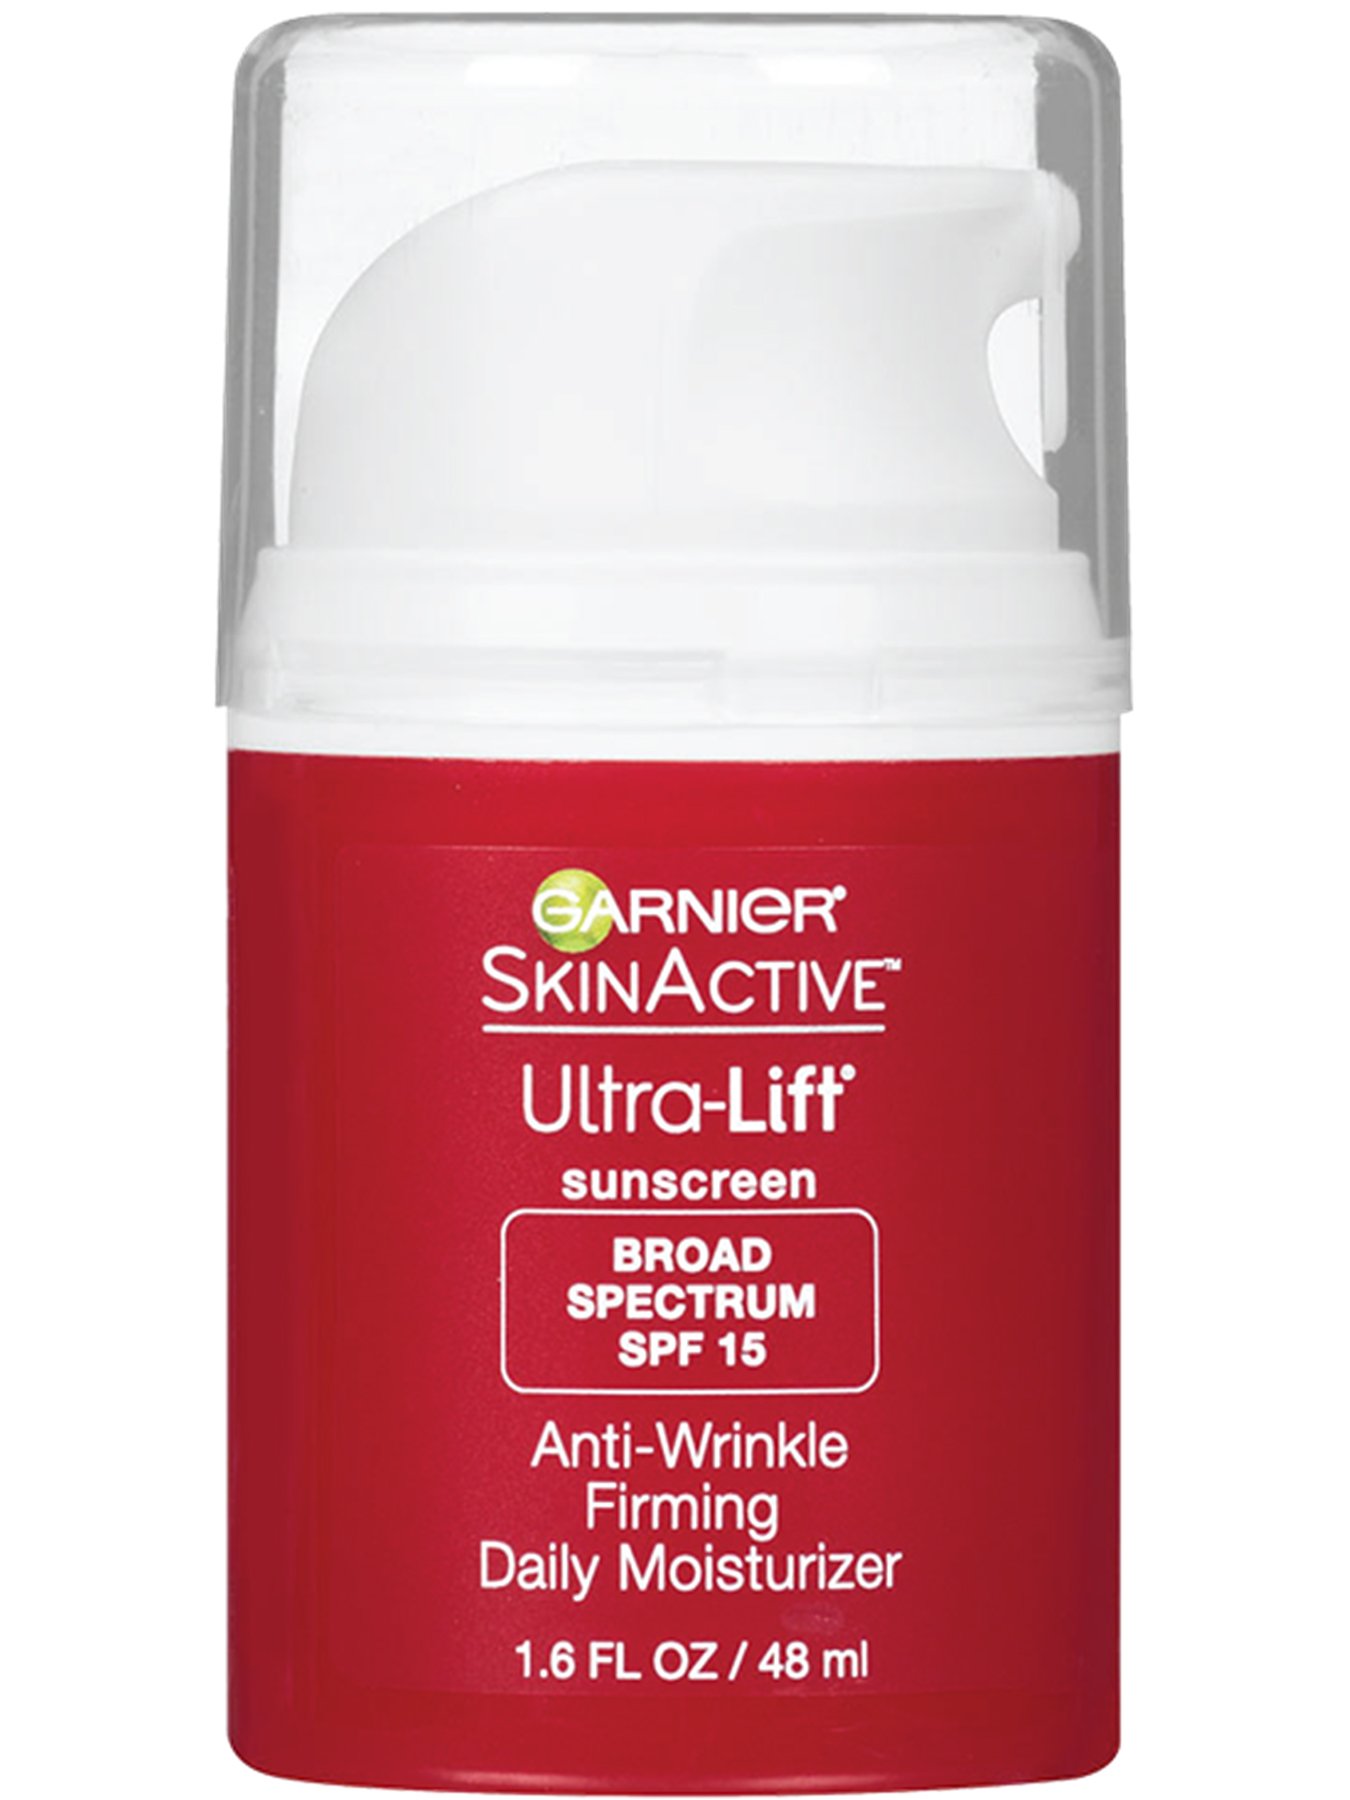 Front view of Ultra-Lift Anti-Wrinkle Firming Moisturizer.